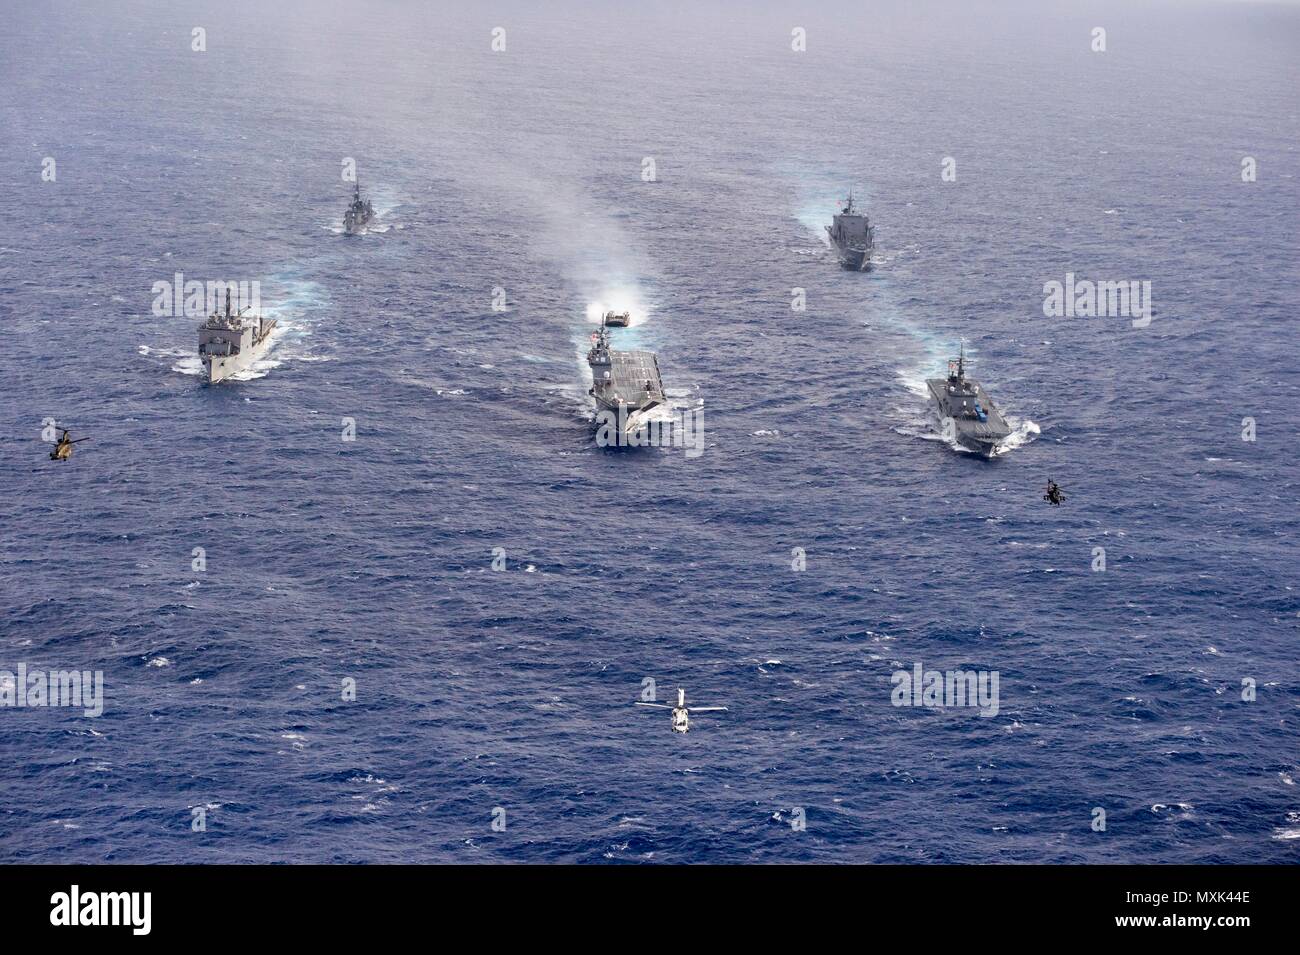 161106-N-ZK021-403  PACIFIC OCEAN (Nov. 6, 2016) Ships participating in Keen Sword 2017 steam in formation during a photo exercise. Keen Sword 17 is a joint and bilateral field training exercise (FTX) between U.S. and Japanese forces meant to increase readiness and interoperability within the framework of the U.S. – Japan alliance. (U.S. Navy photo by Petty Officer 1st Class Nardel Gervacio/Released) Stock Photo